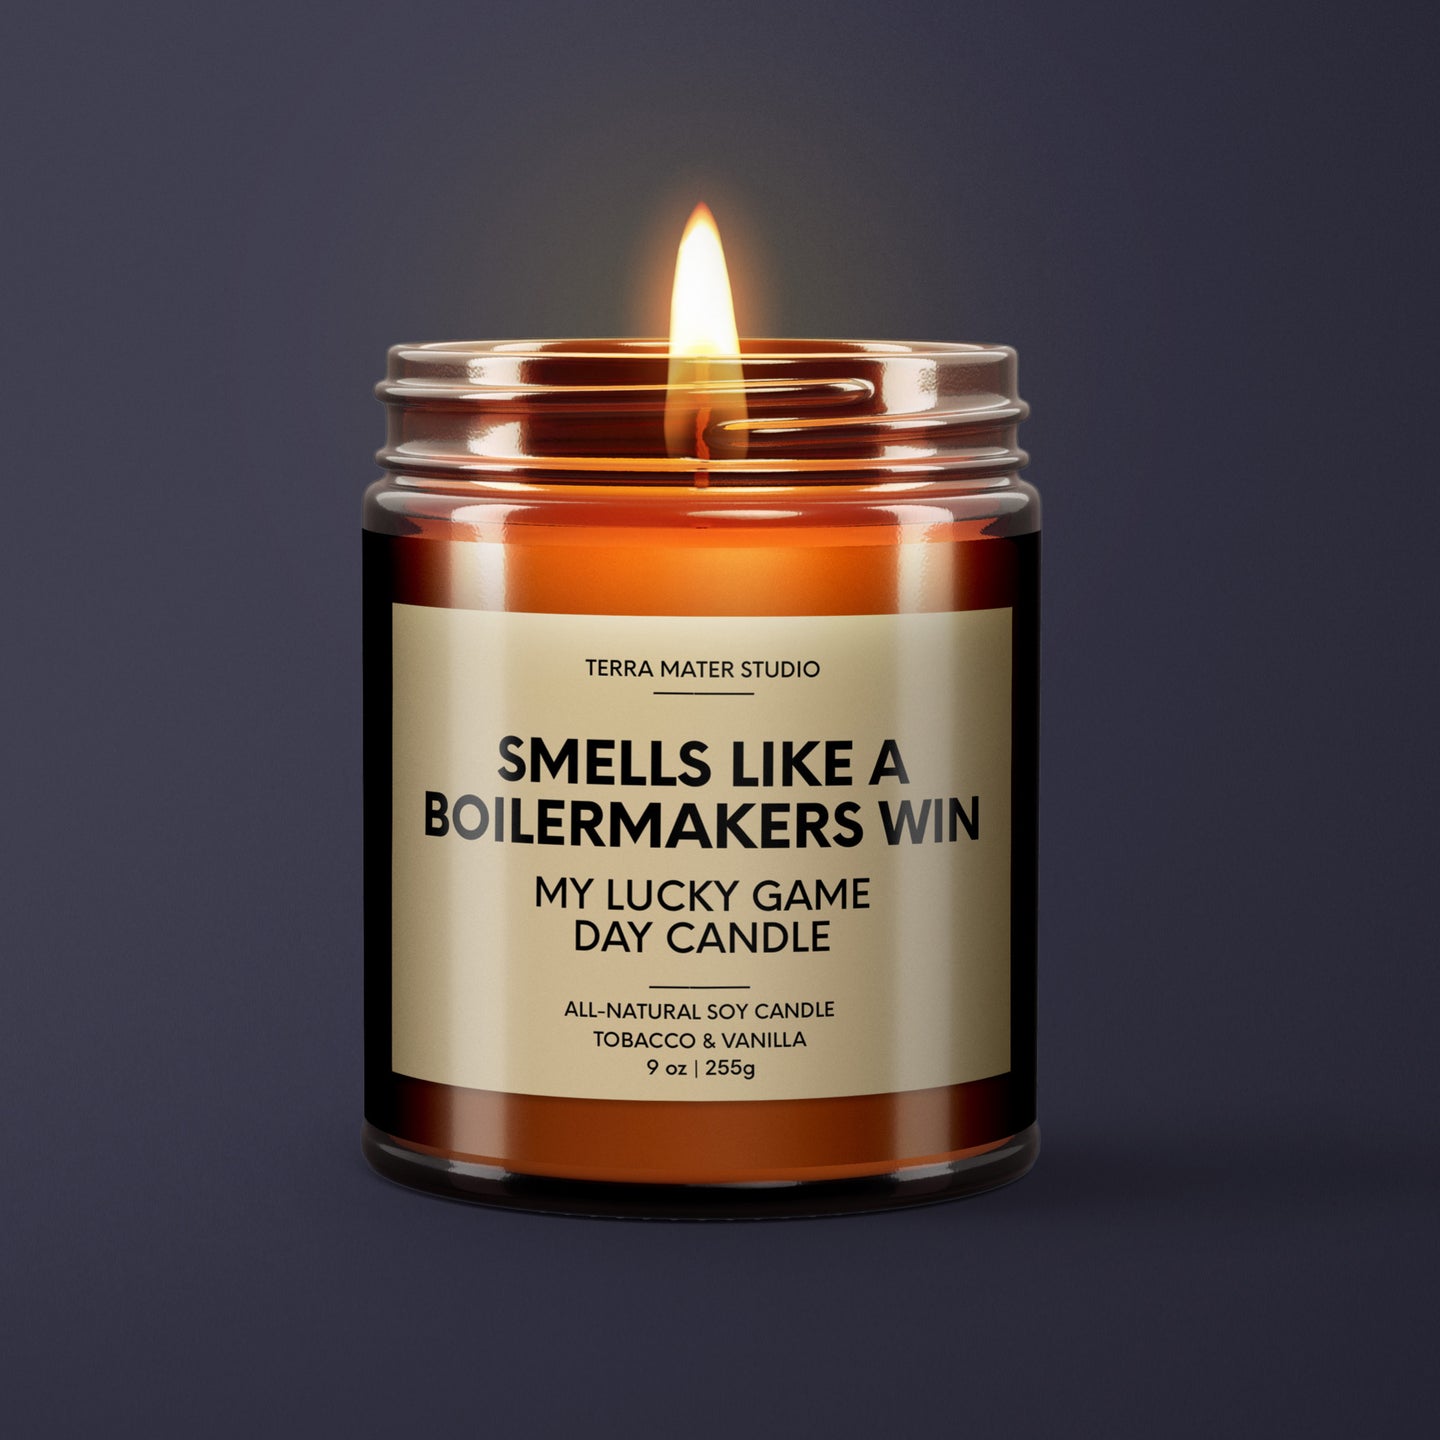 Smells Like A Boilermakers Win | Purdue Lucky Game Day Candle | Soy Wax Candle